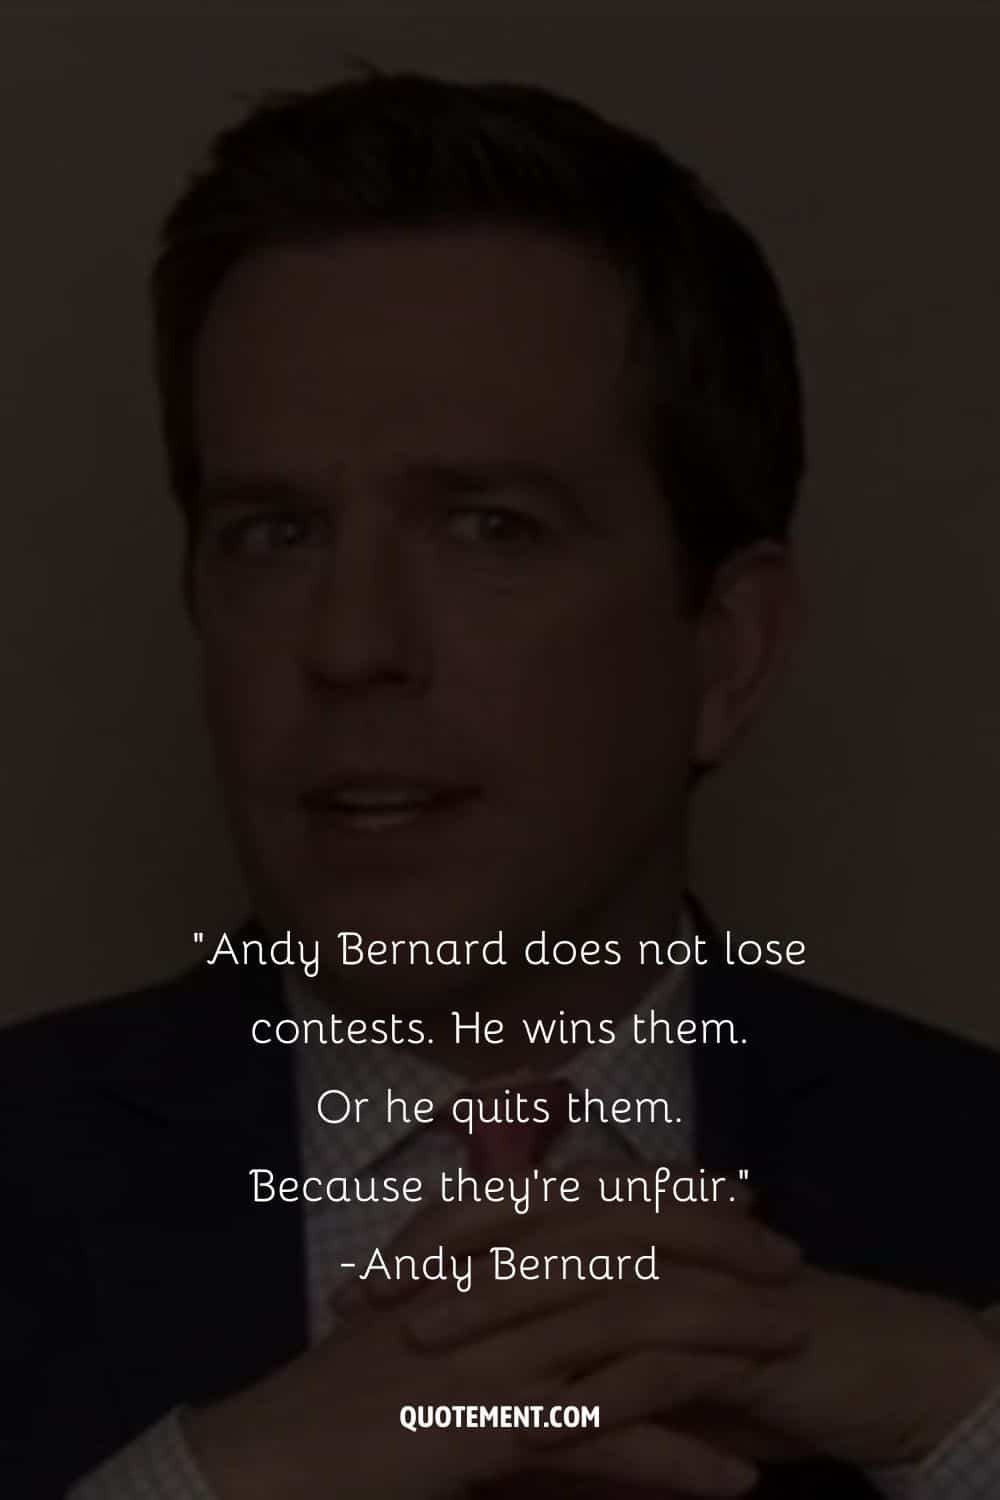 Andy Bernard does not lose contests